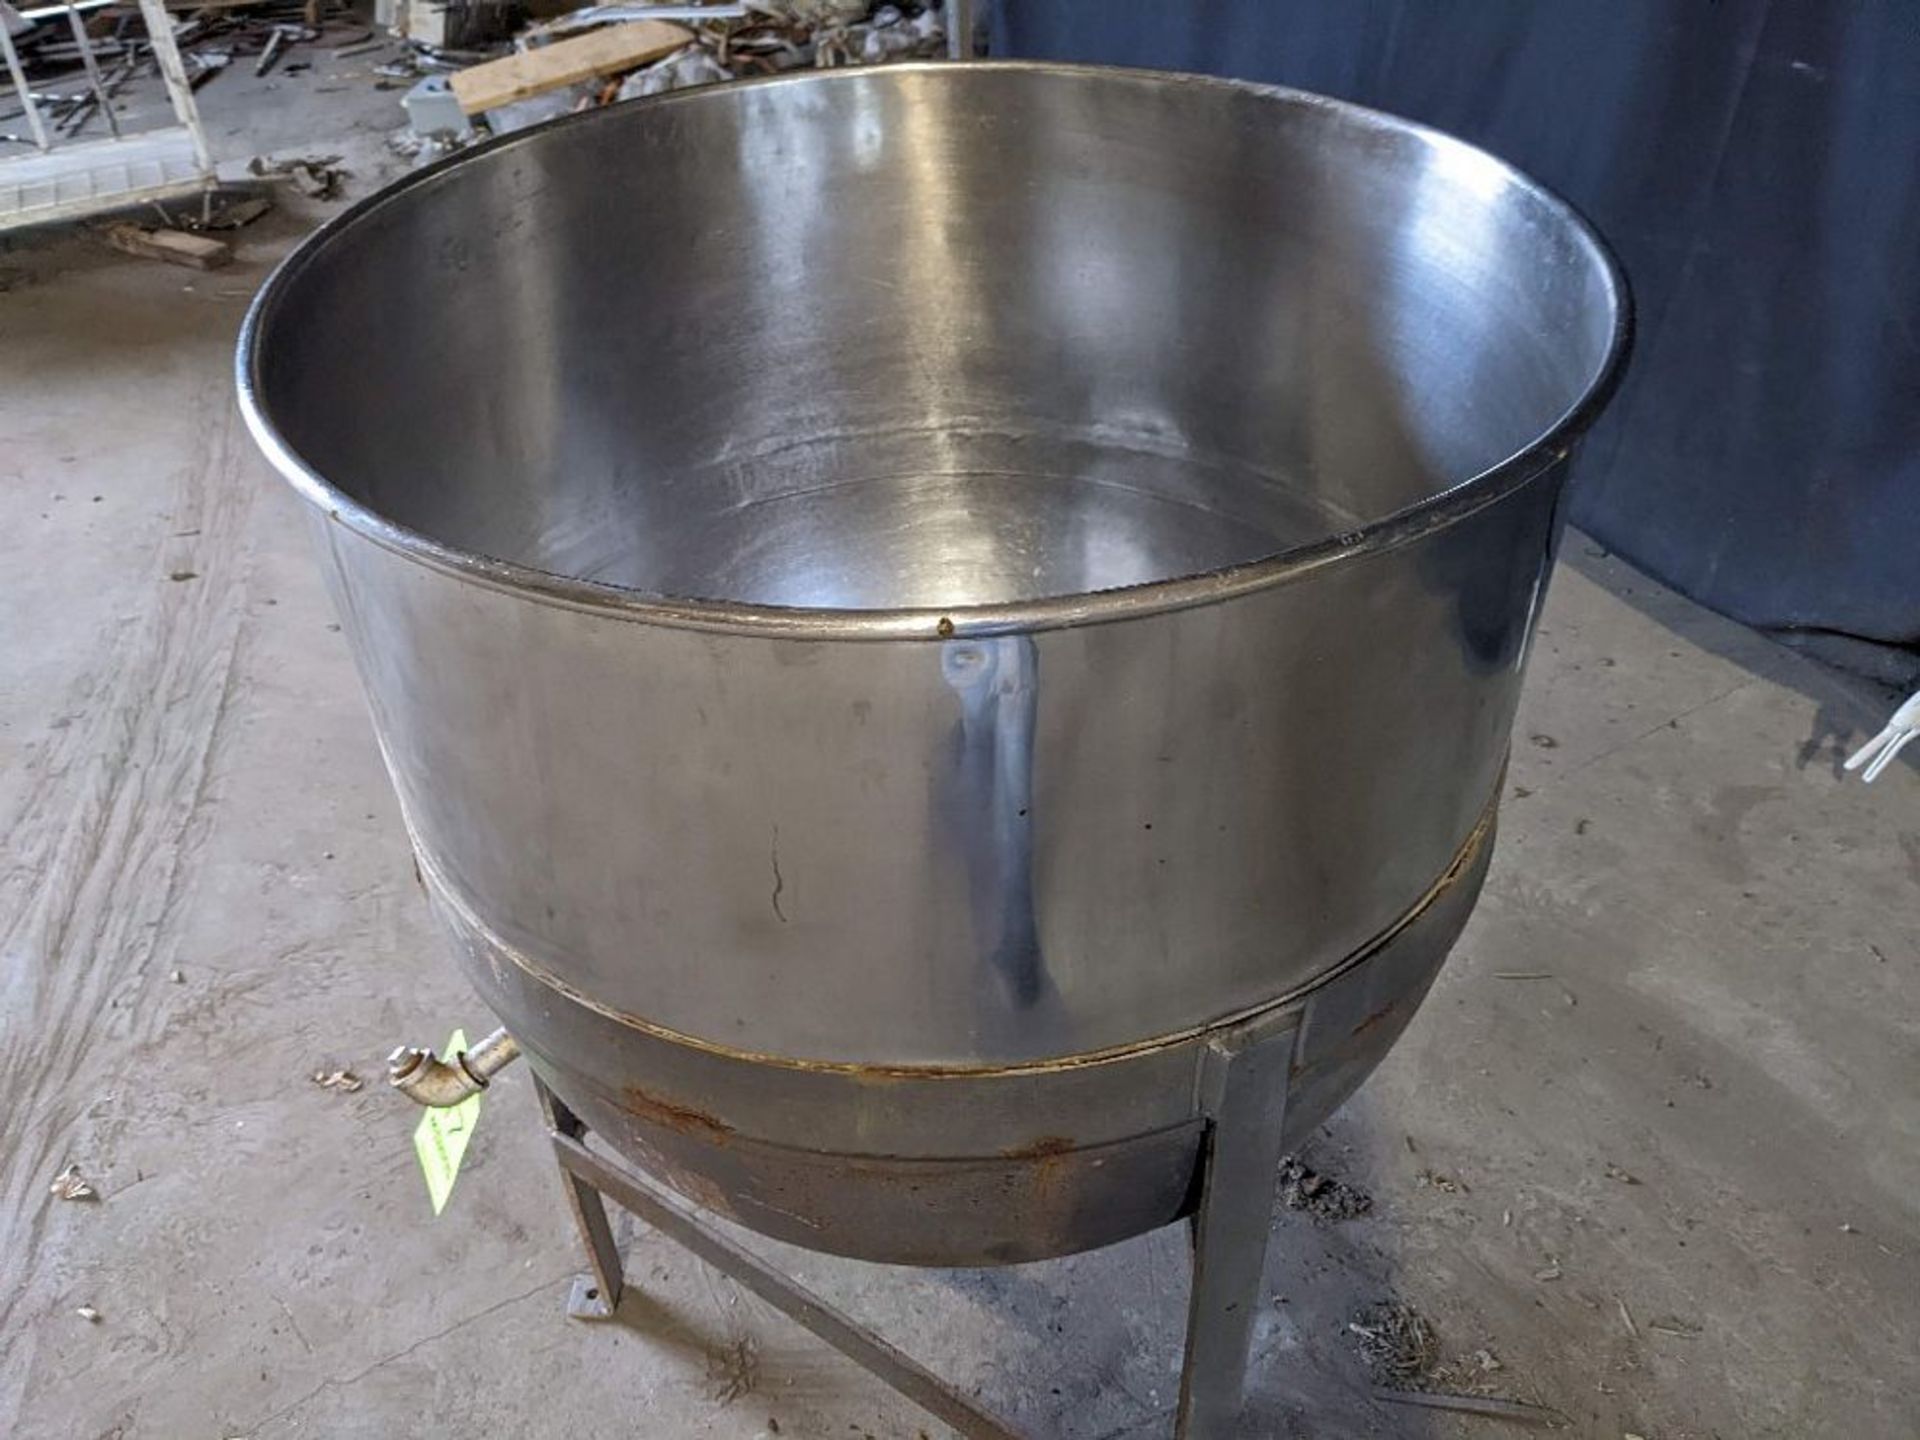 Qty (1) Stainless Steel Jacketed Kettle 90 Gallon - All Stainless Steel Construction - Half Jacket - - Image 5 of 5